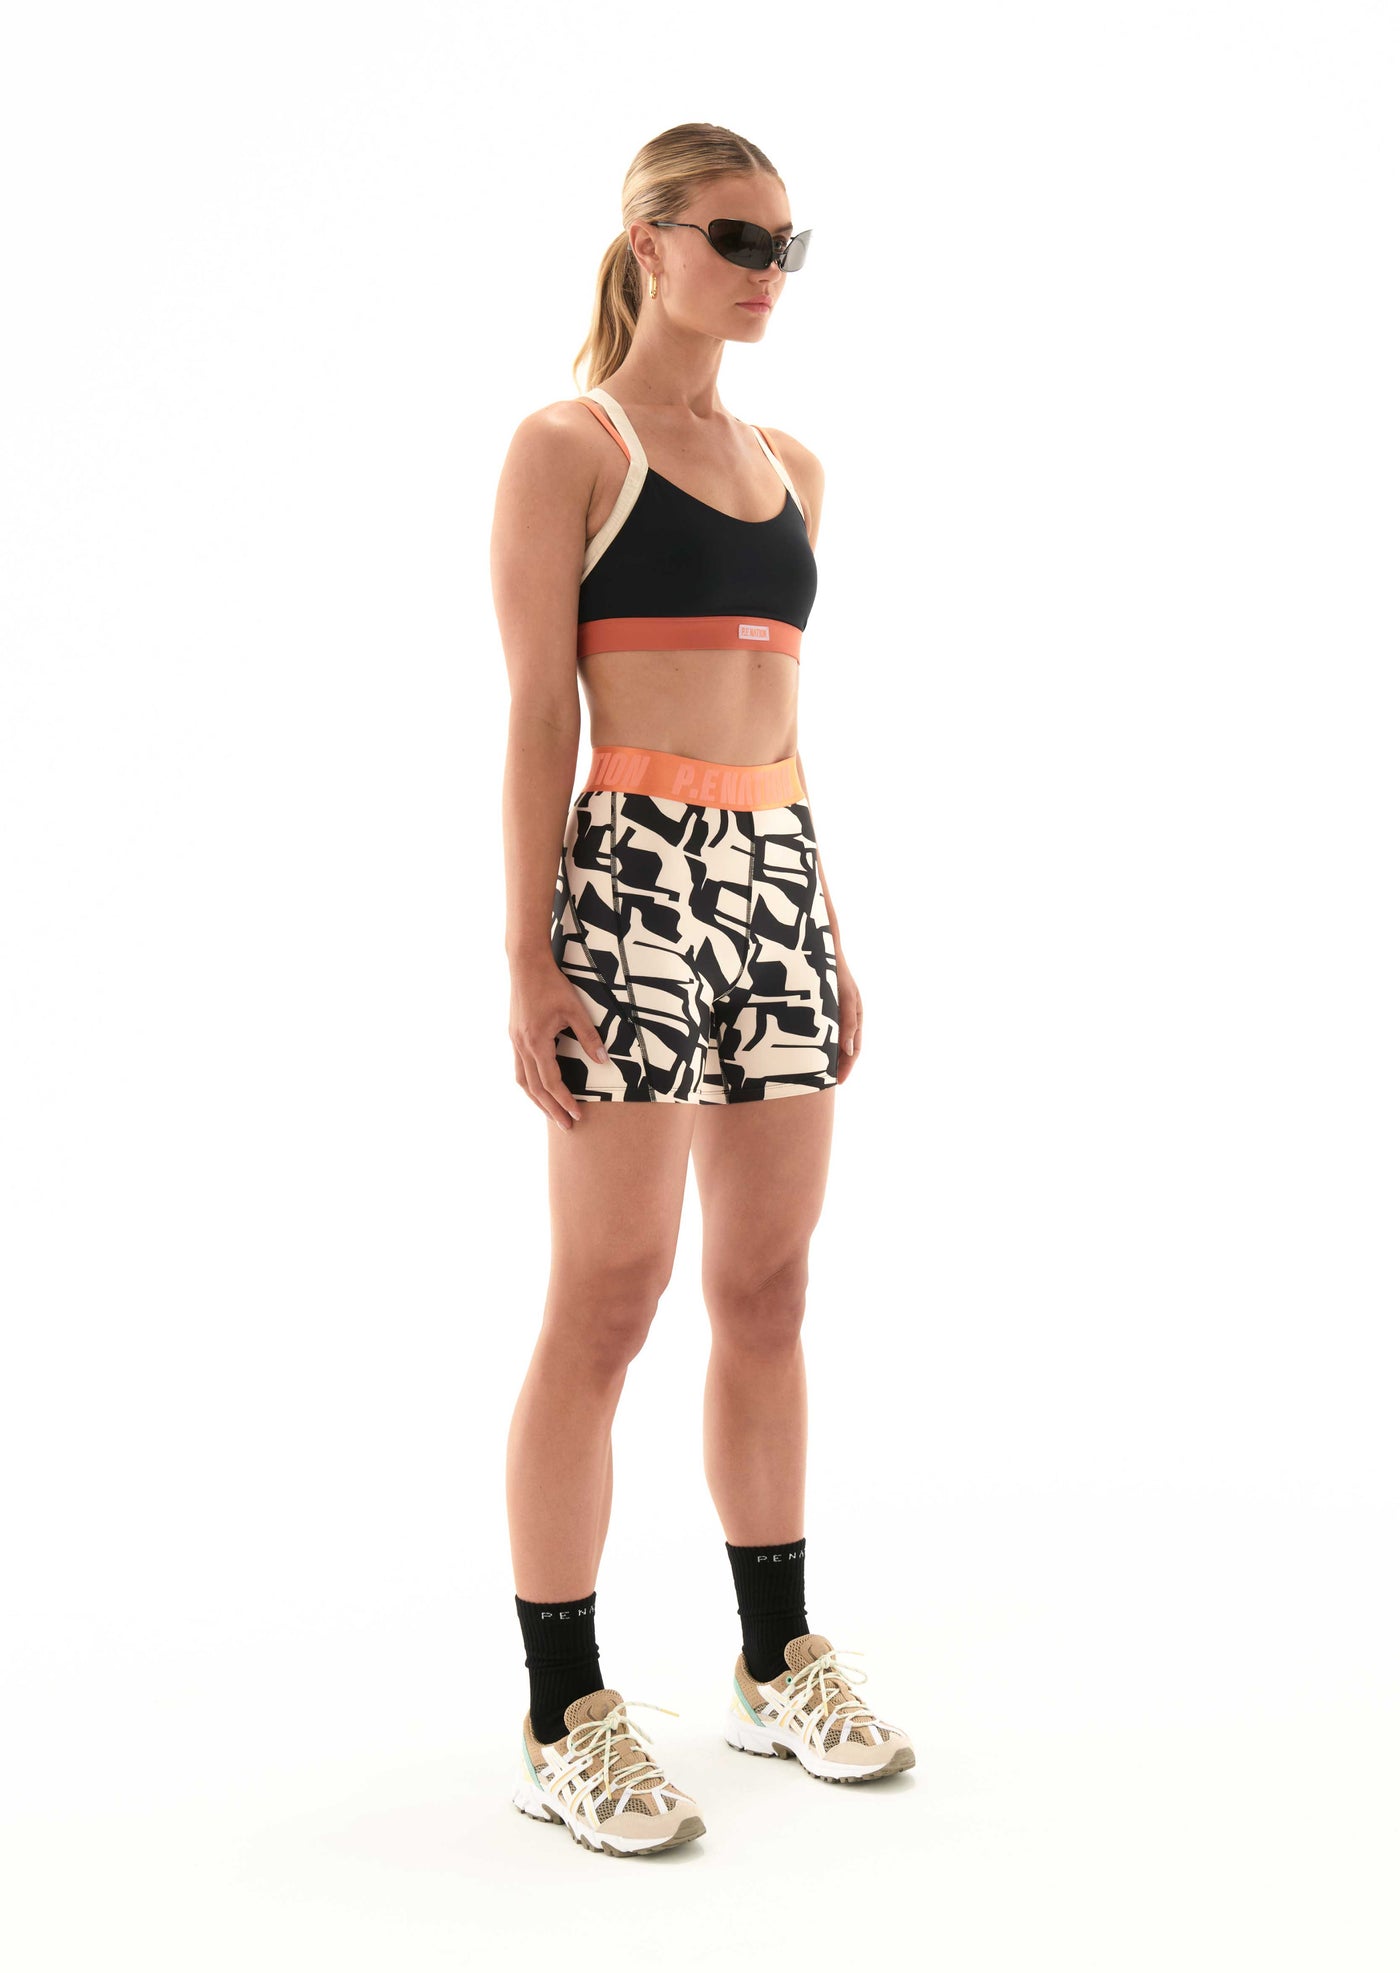 ROCKLAND BIKE SHORT IN ABSTRACT PRINT